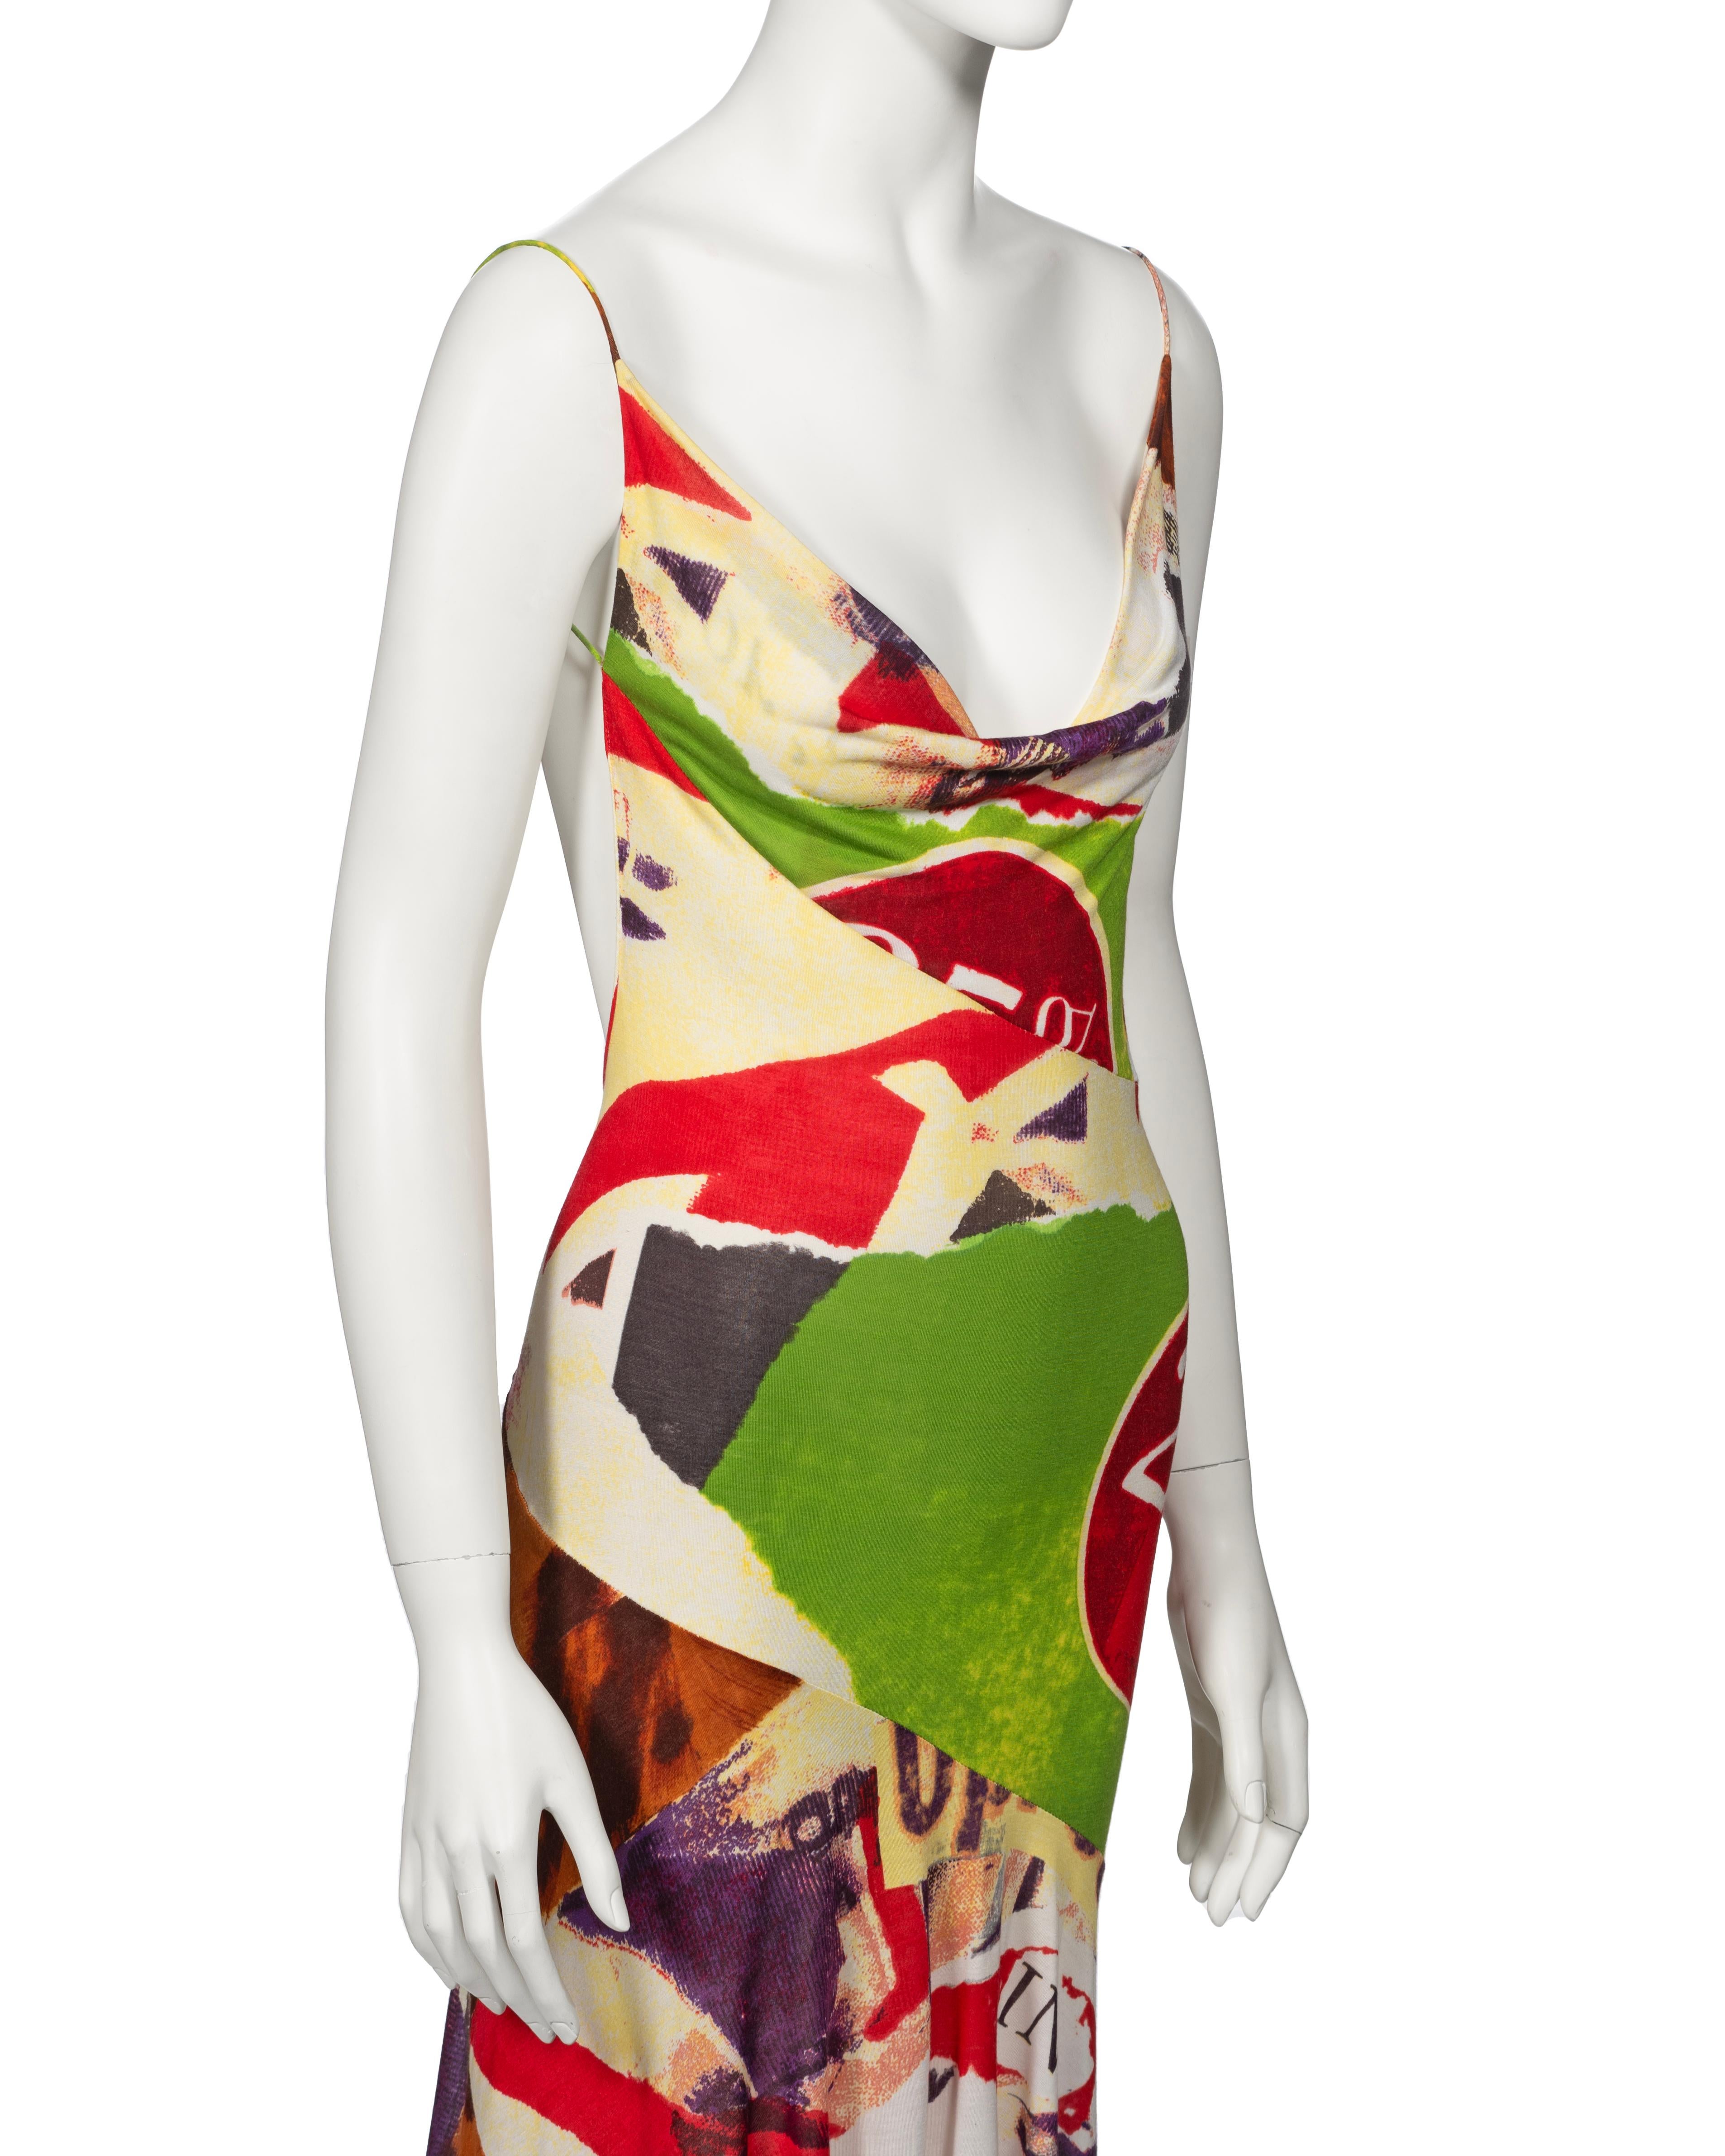 Christian Dior by John Galliano Montage Print Silk Jersey Dress, ss 2003 For Sale 1